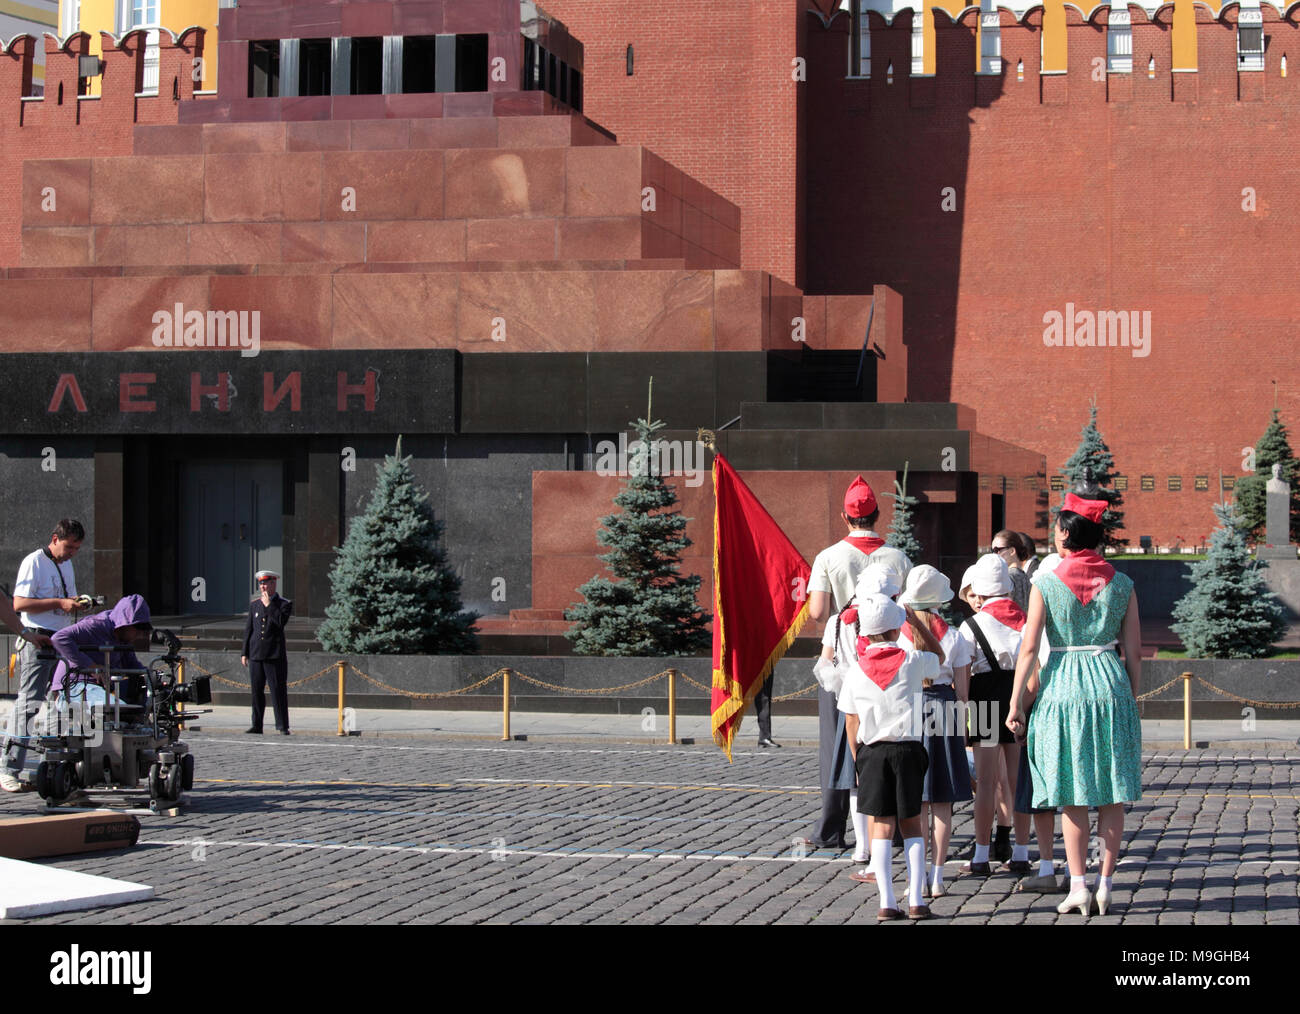 Moscow, Russia - July 8, 2012: Actors during filming the Leader's Way movie from Kazakhfilm on Red Square, in Moscow, Russia on July 8, 2012 Stock Photo